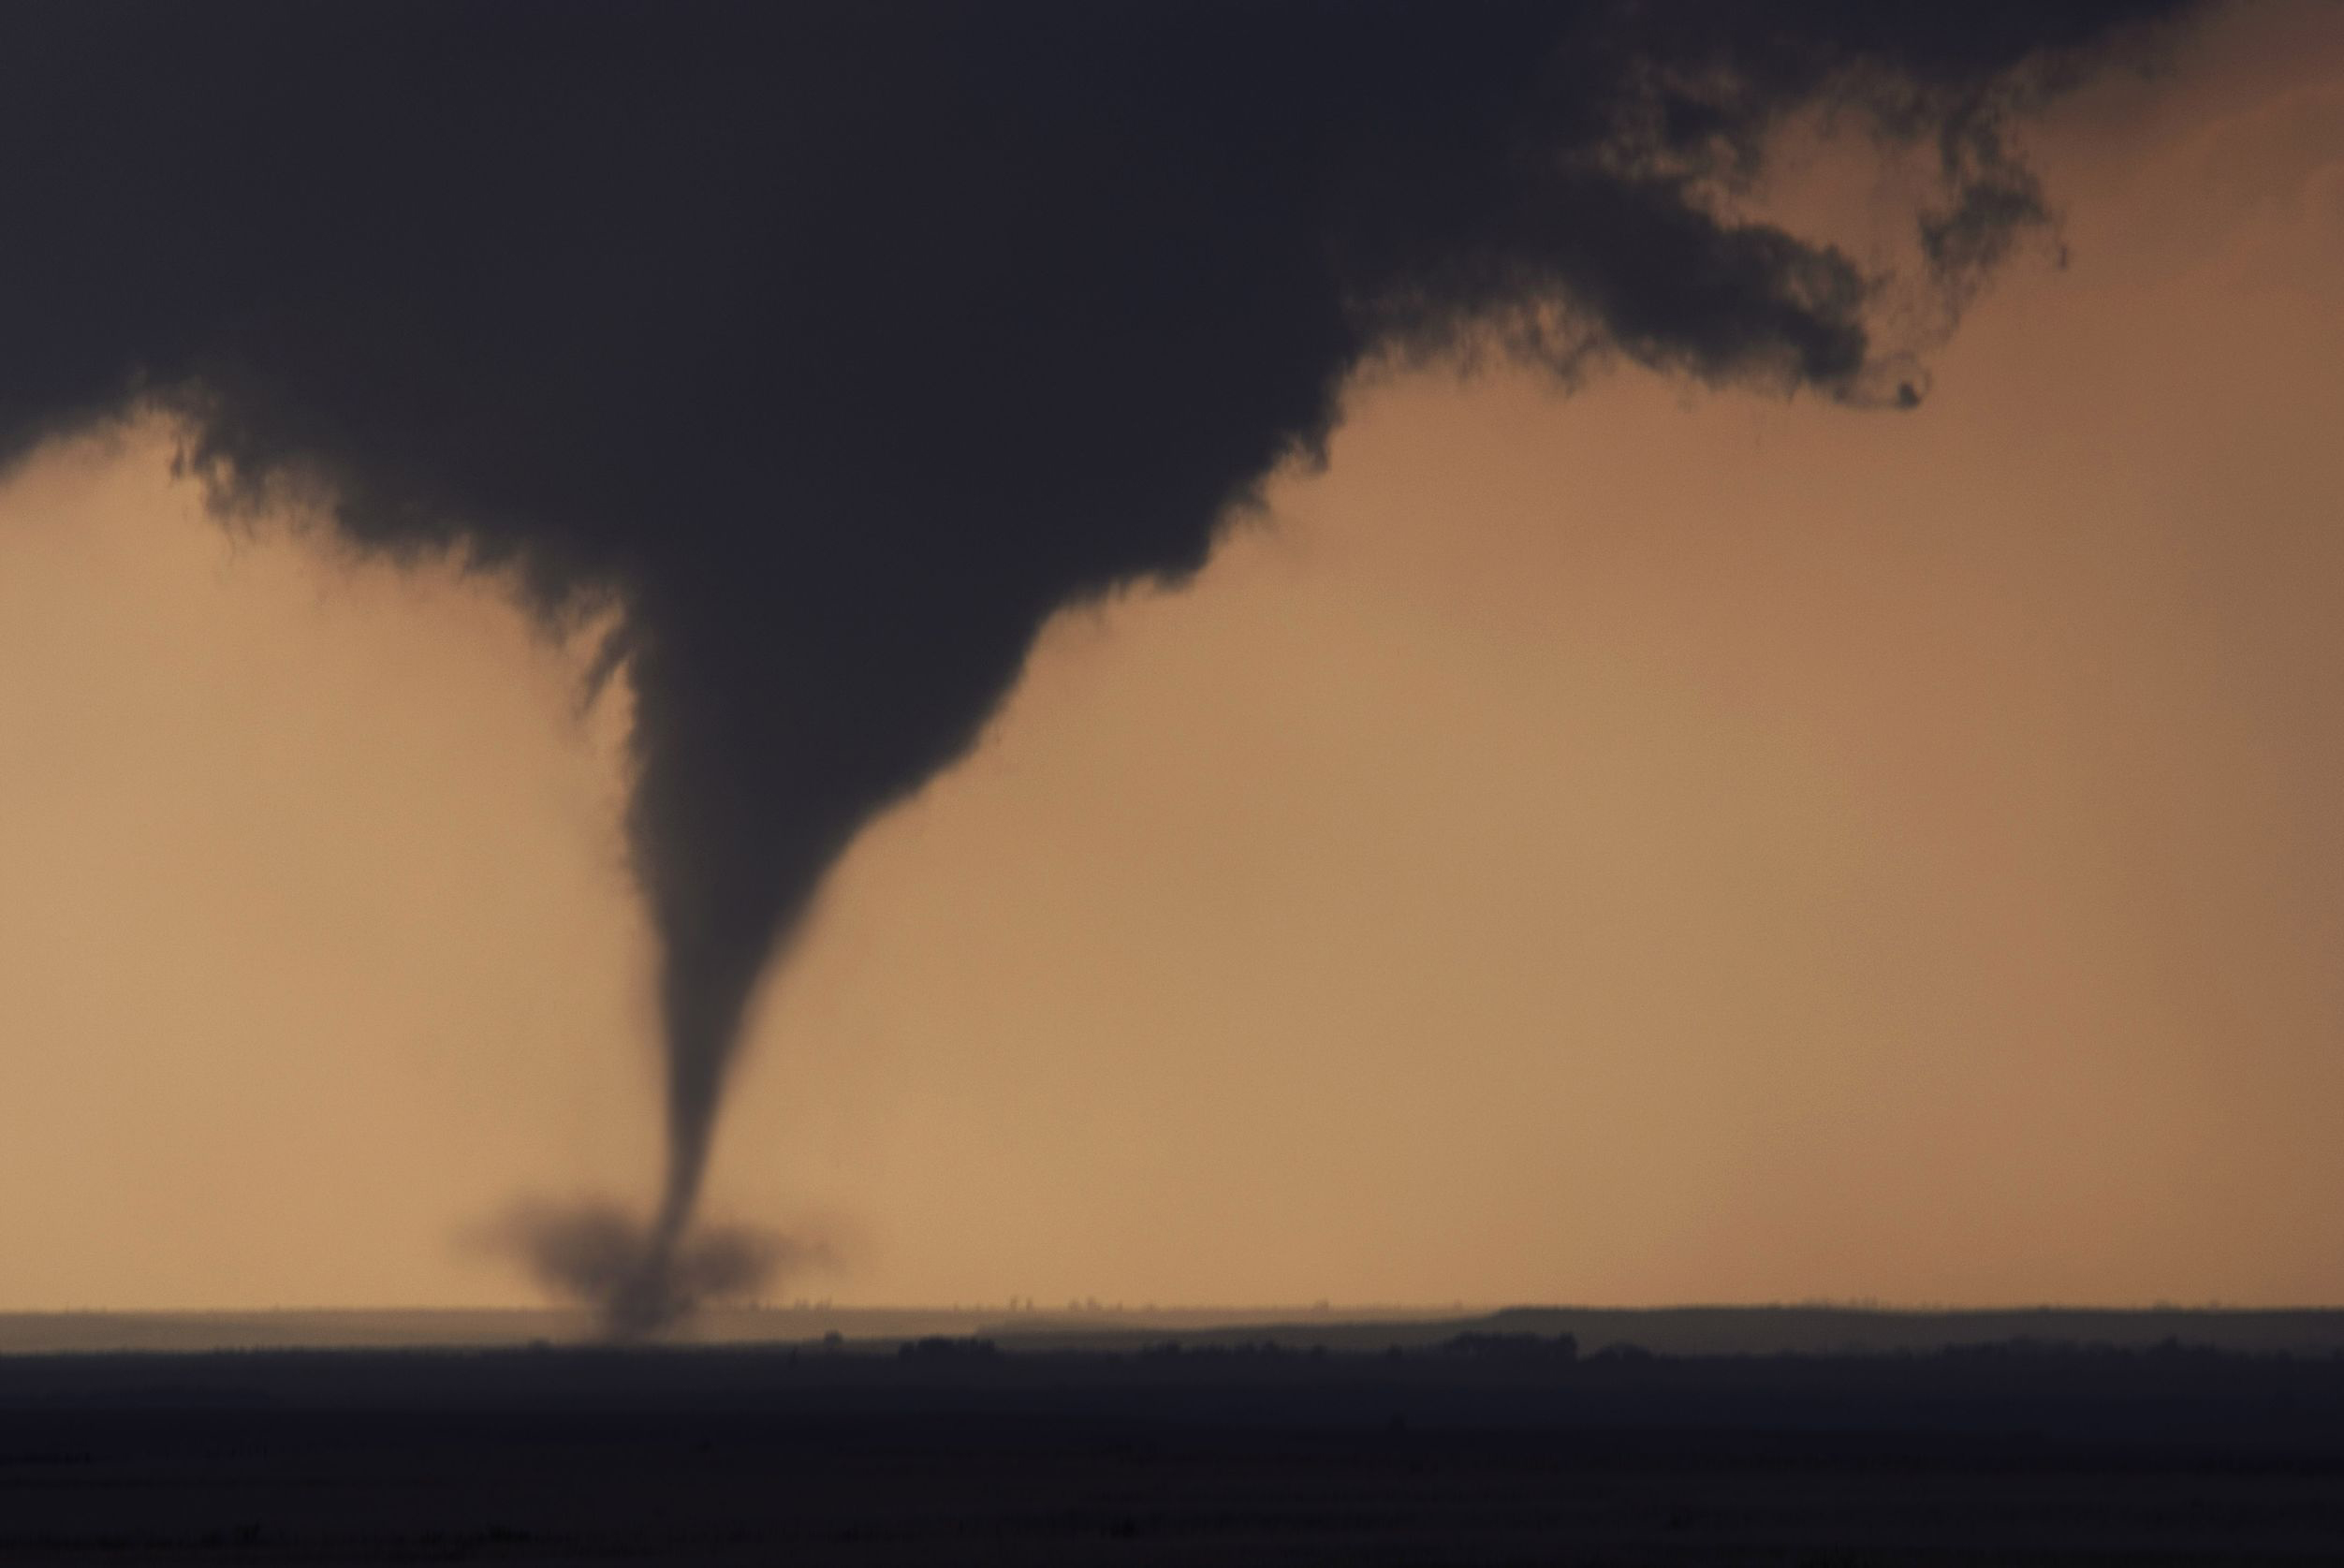 Preliminary Data Kansas Saw Big Increase in Tornadoes in 2015